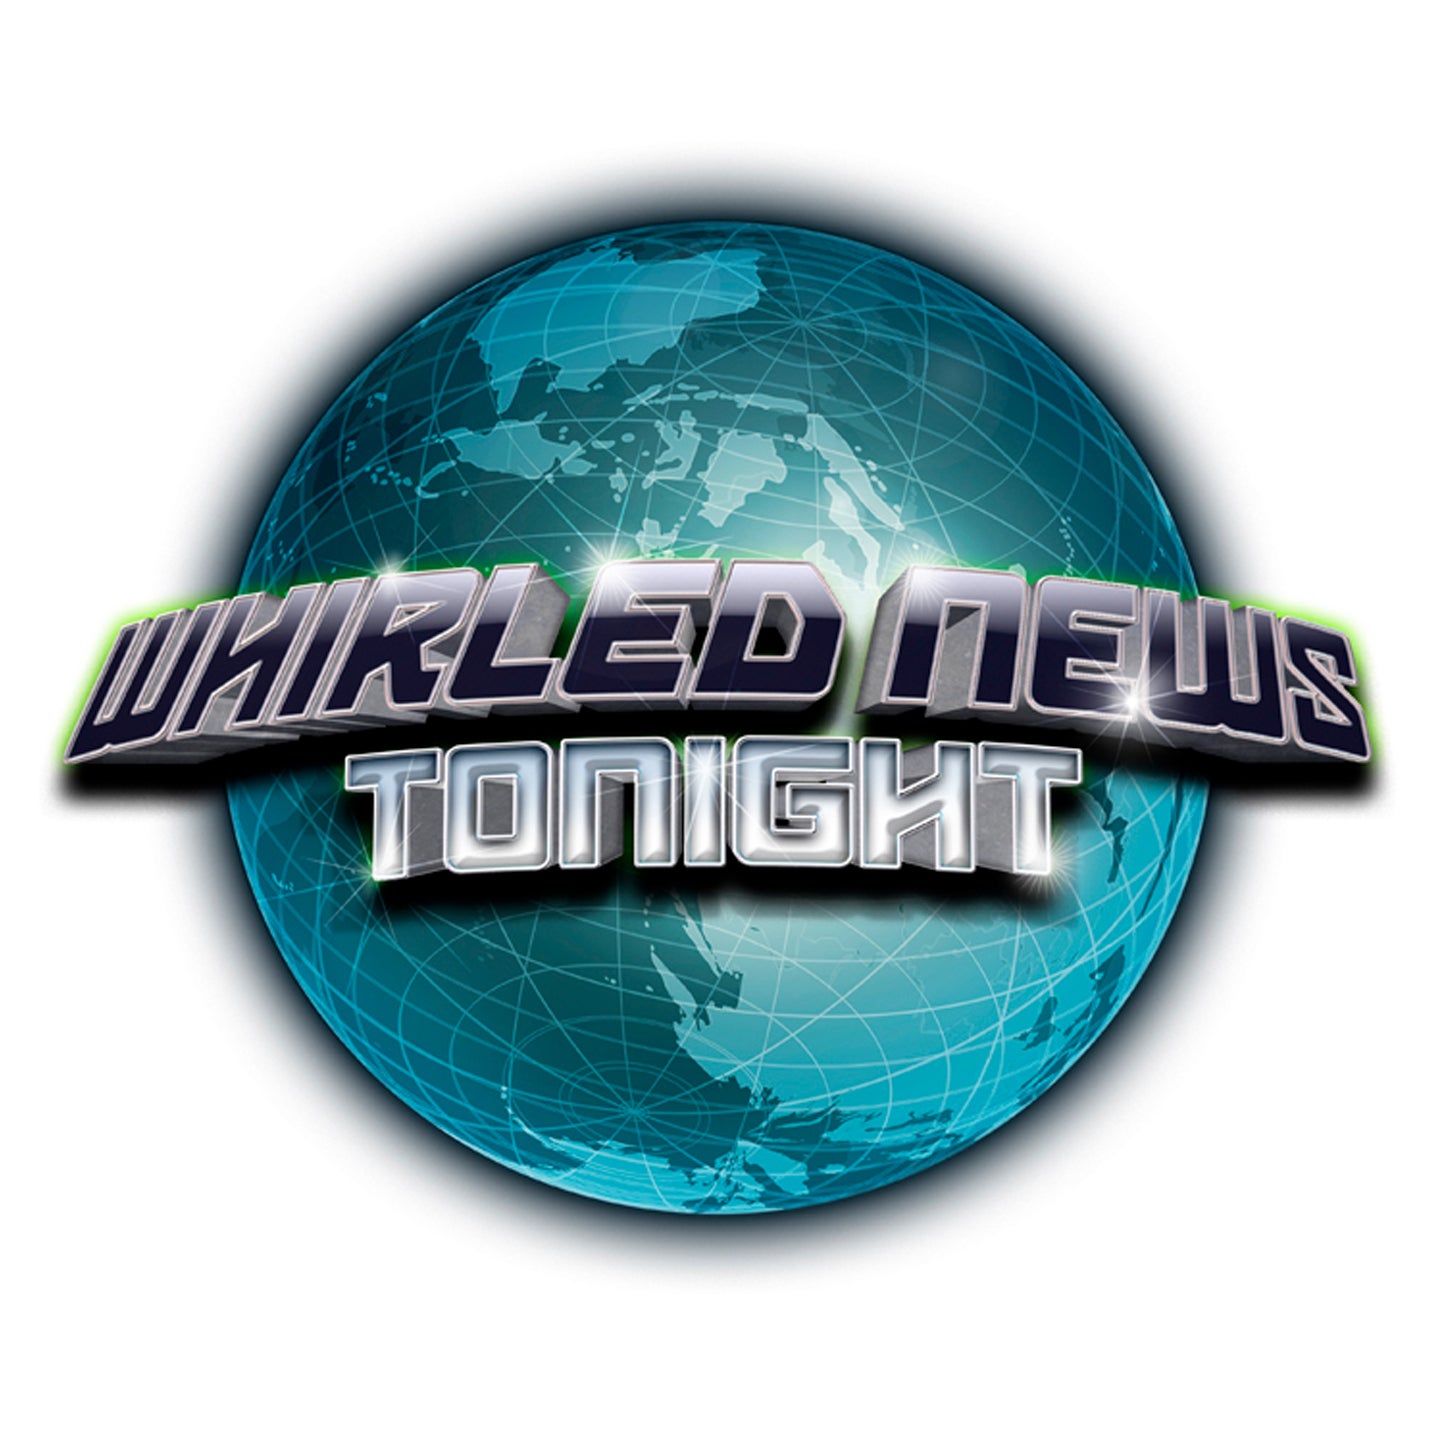 More Info for Funny Friday: Enter to Win Tickets to Whirled News Tonight